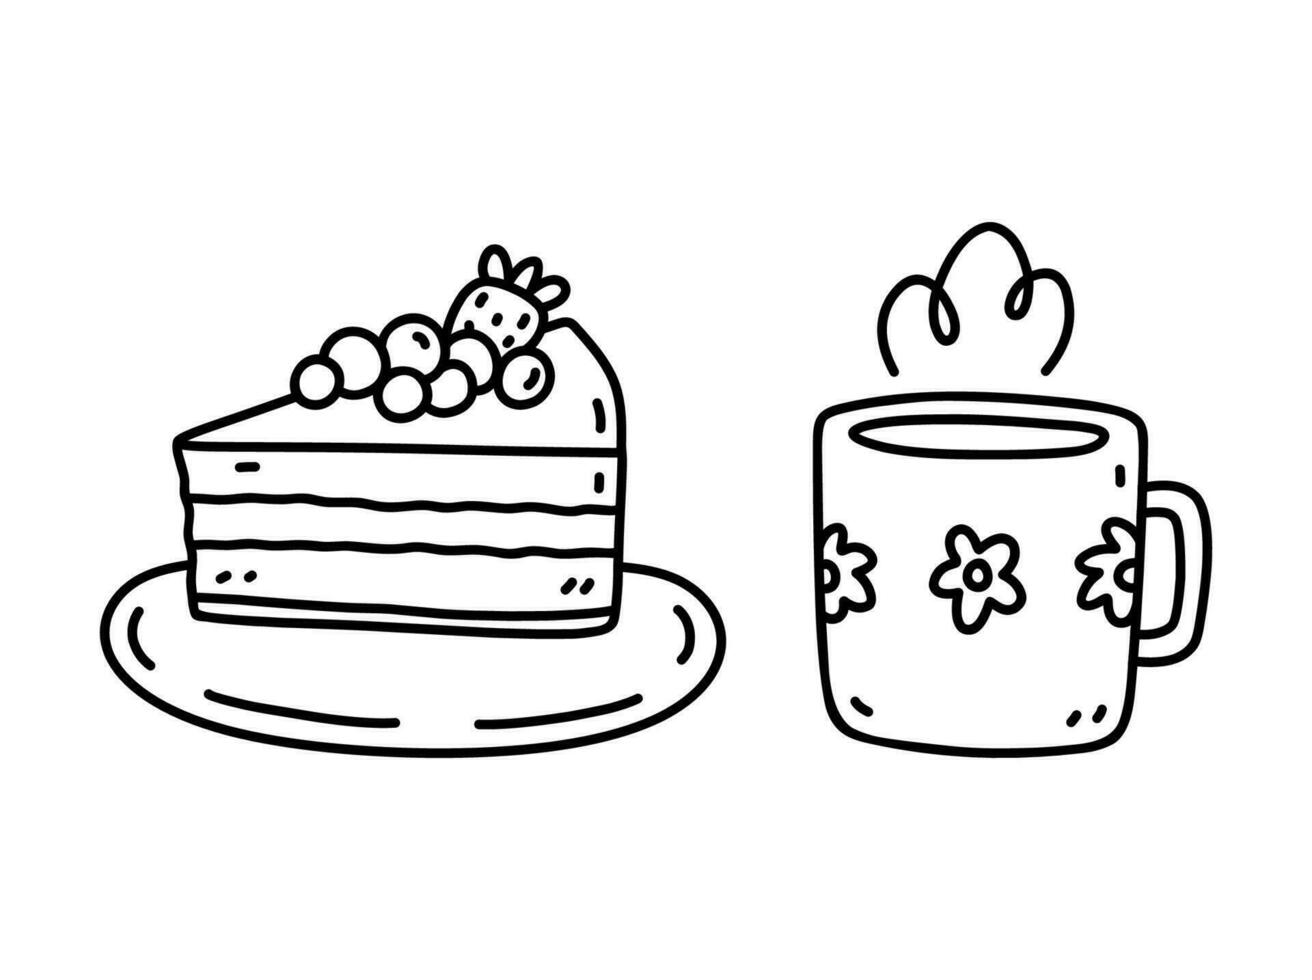 A cup of tea with a piece of cake isolated on white background. Vector hand-drawn illustration in doodle style. Perfect for cards, menu, logo, decorations, various designs.